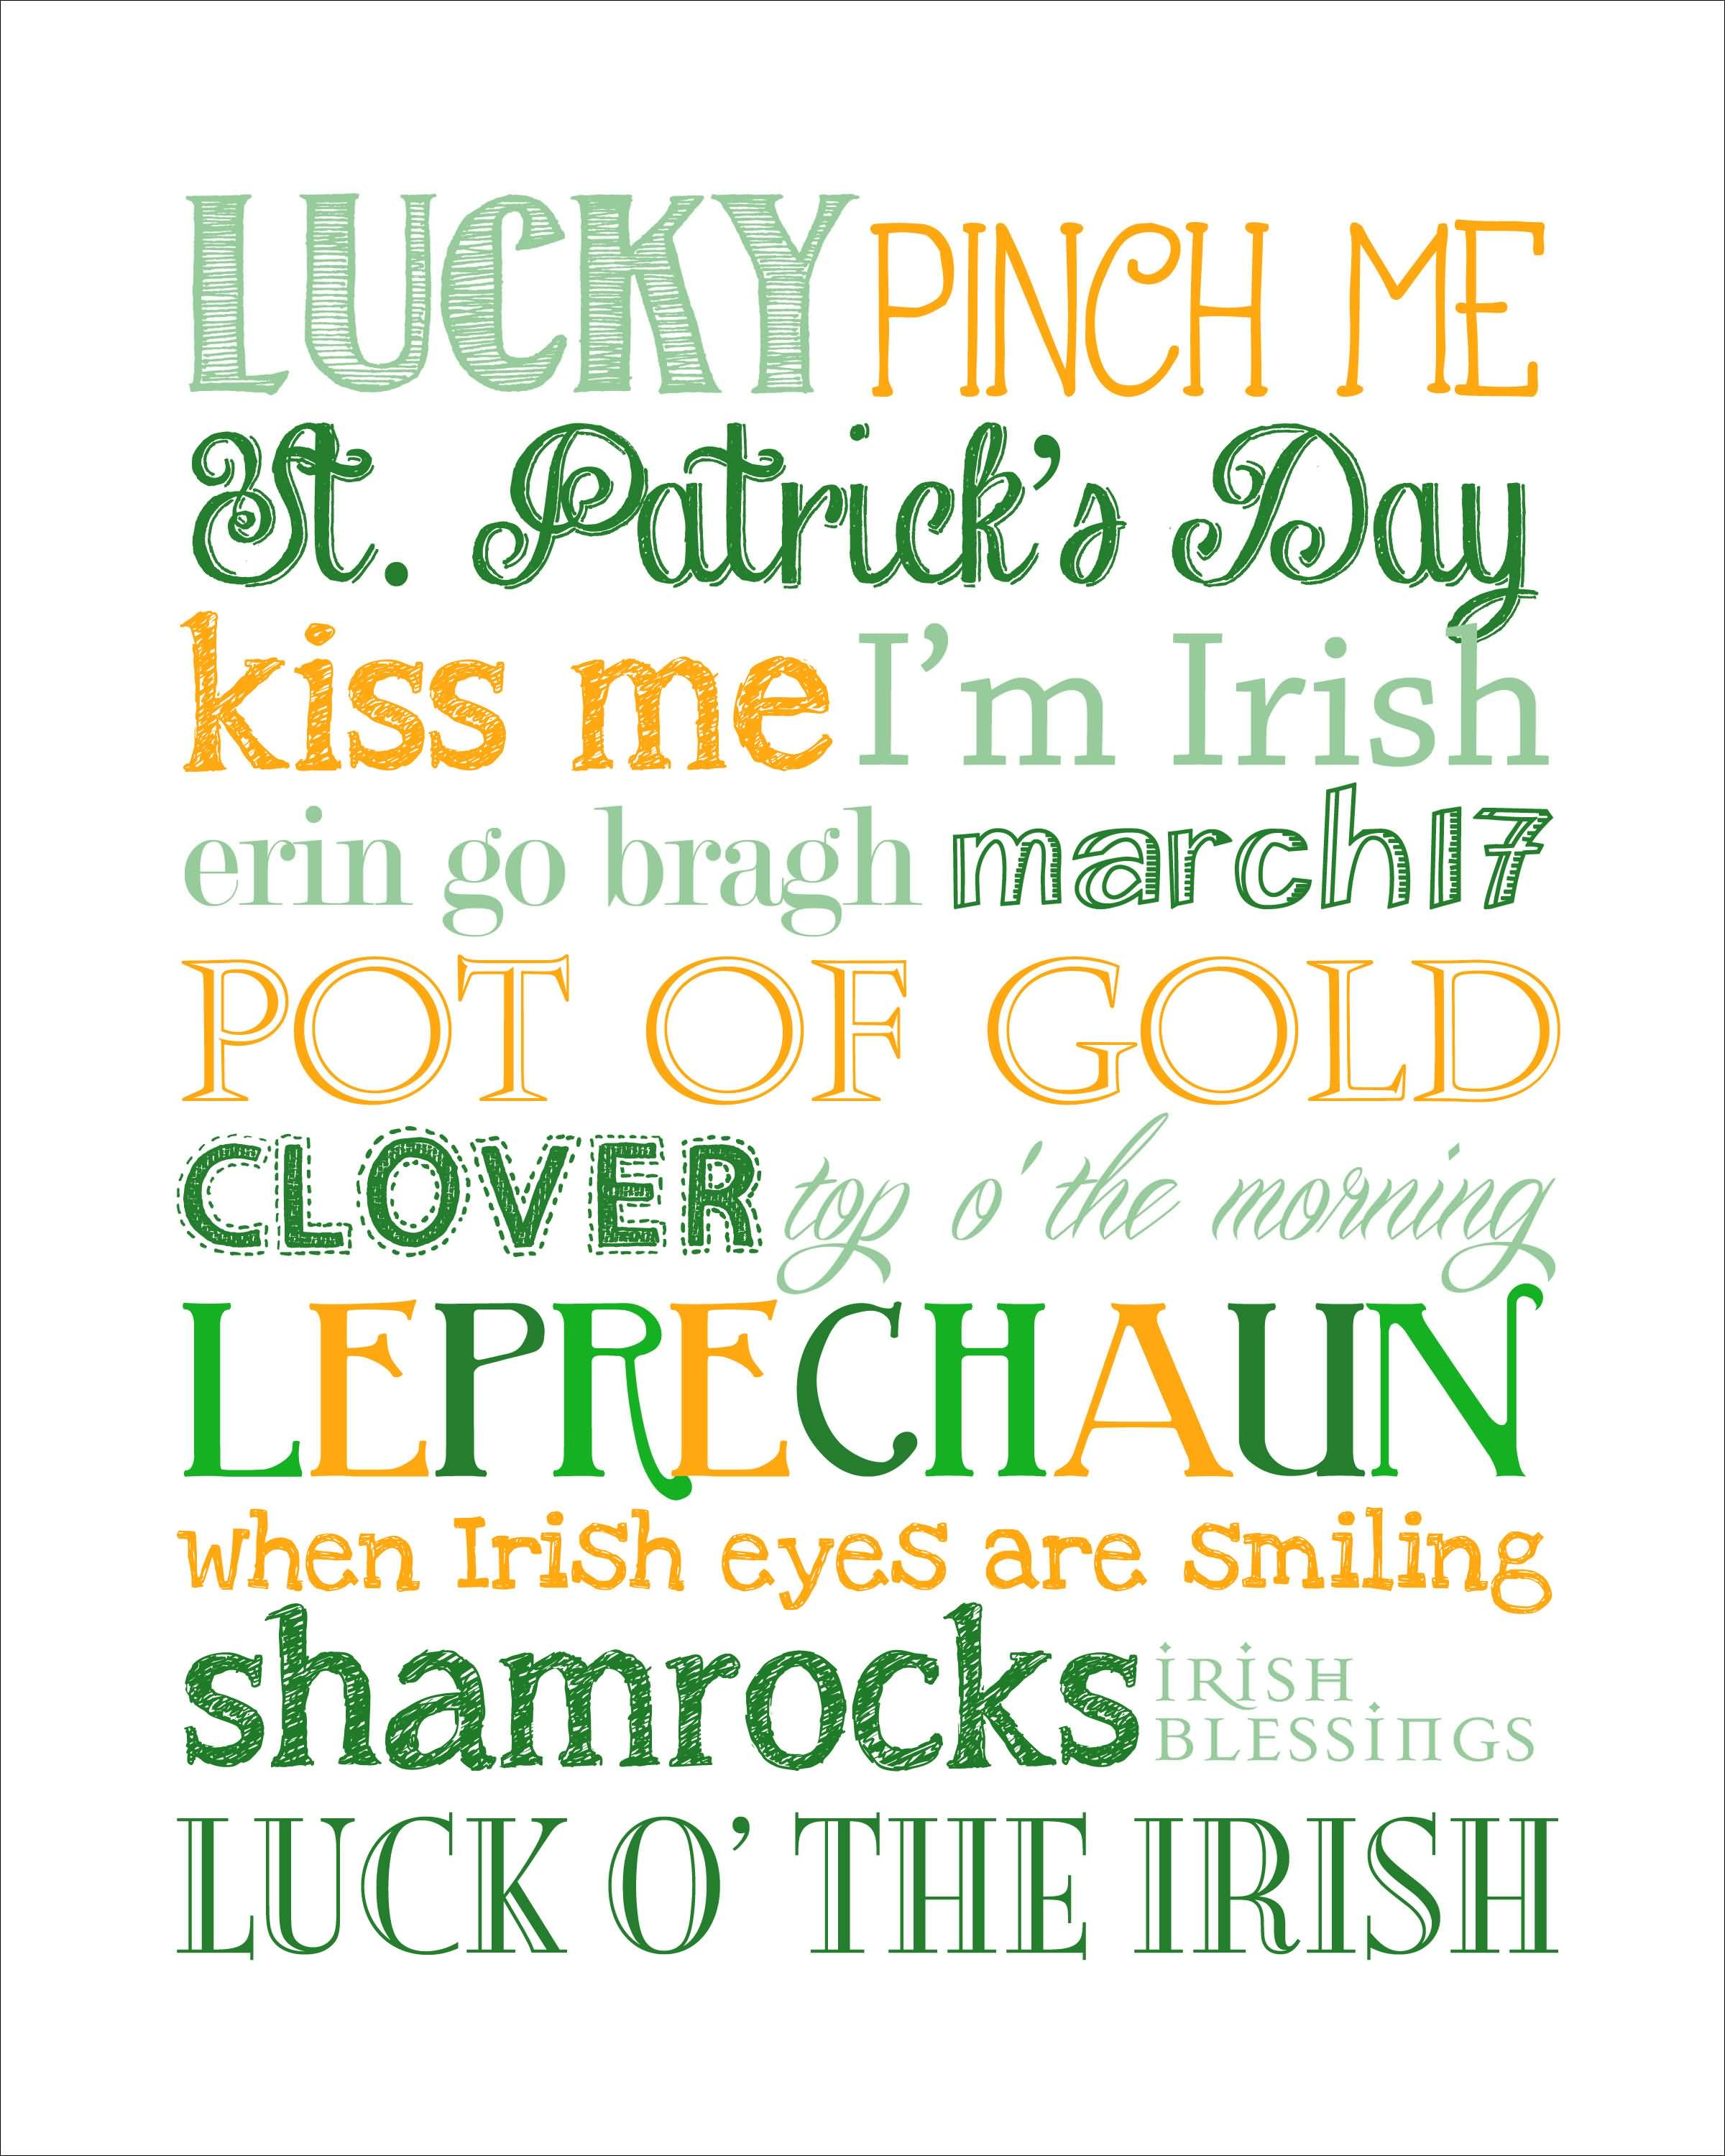 St. Patrick's Day Quotes 09